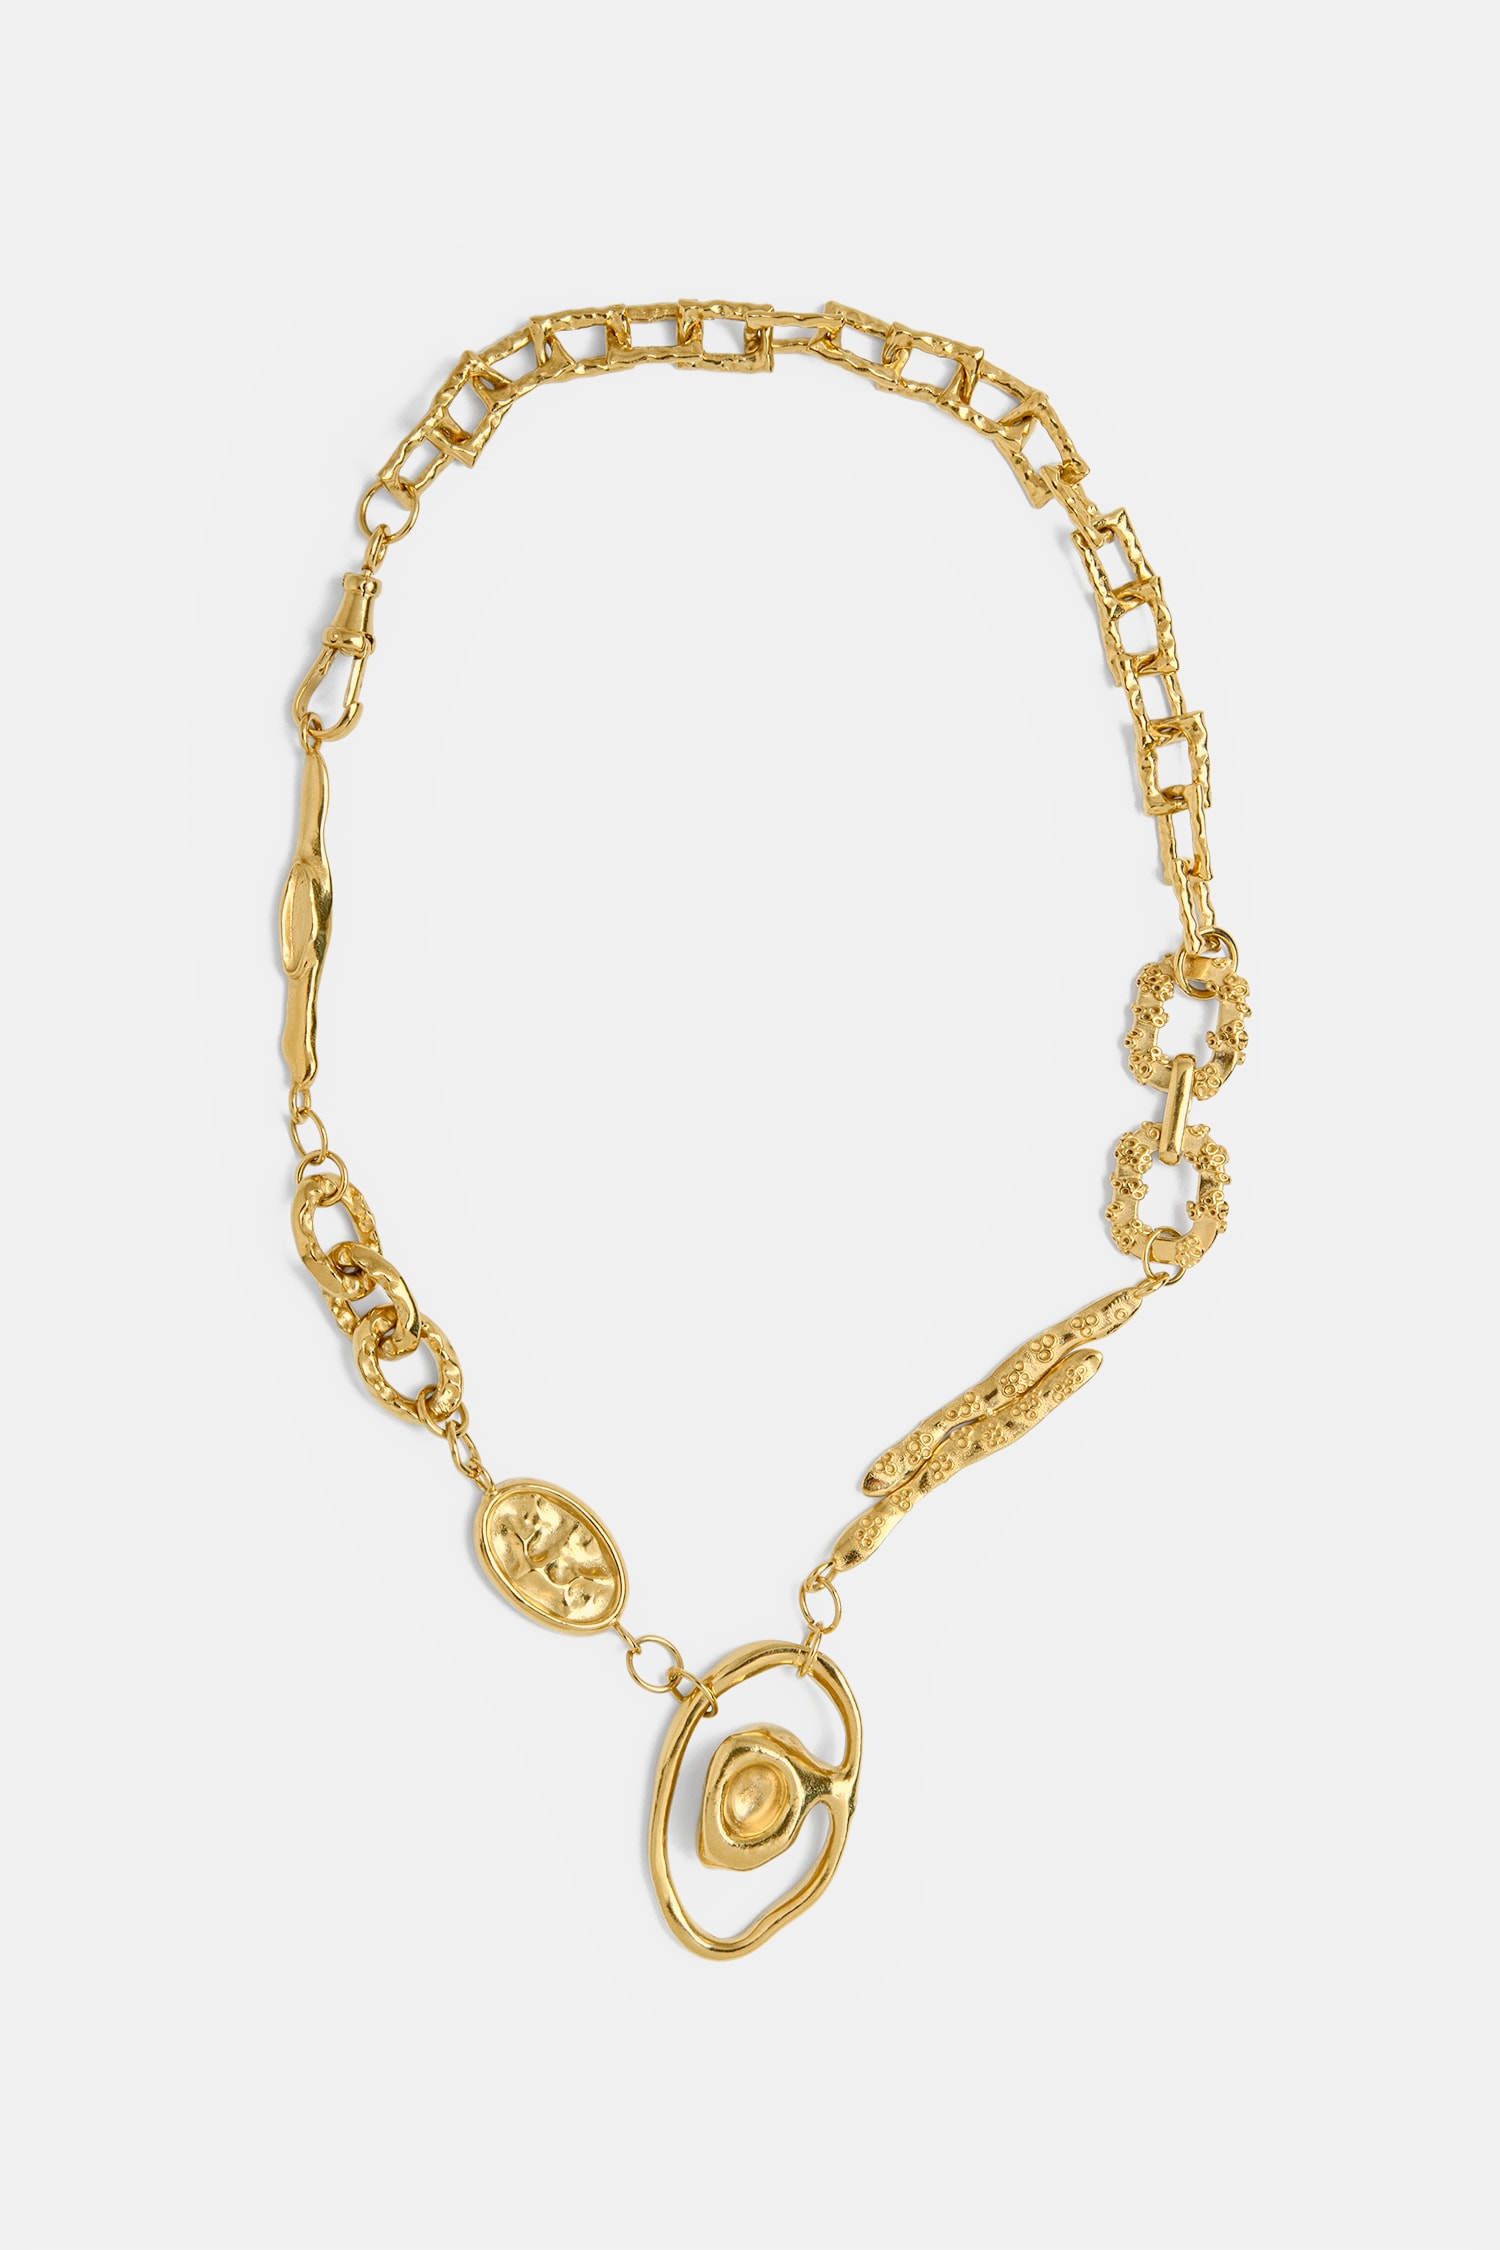 Eclectic Nest Big Necklace Gold Plated by Yoster | FLAIR